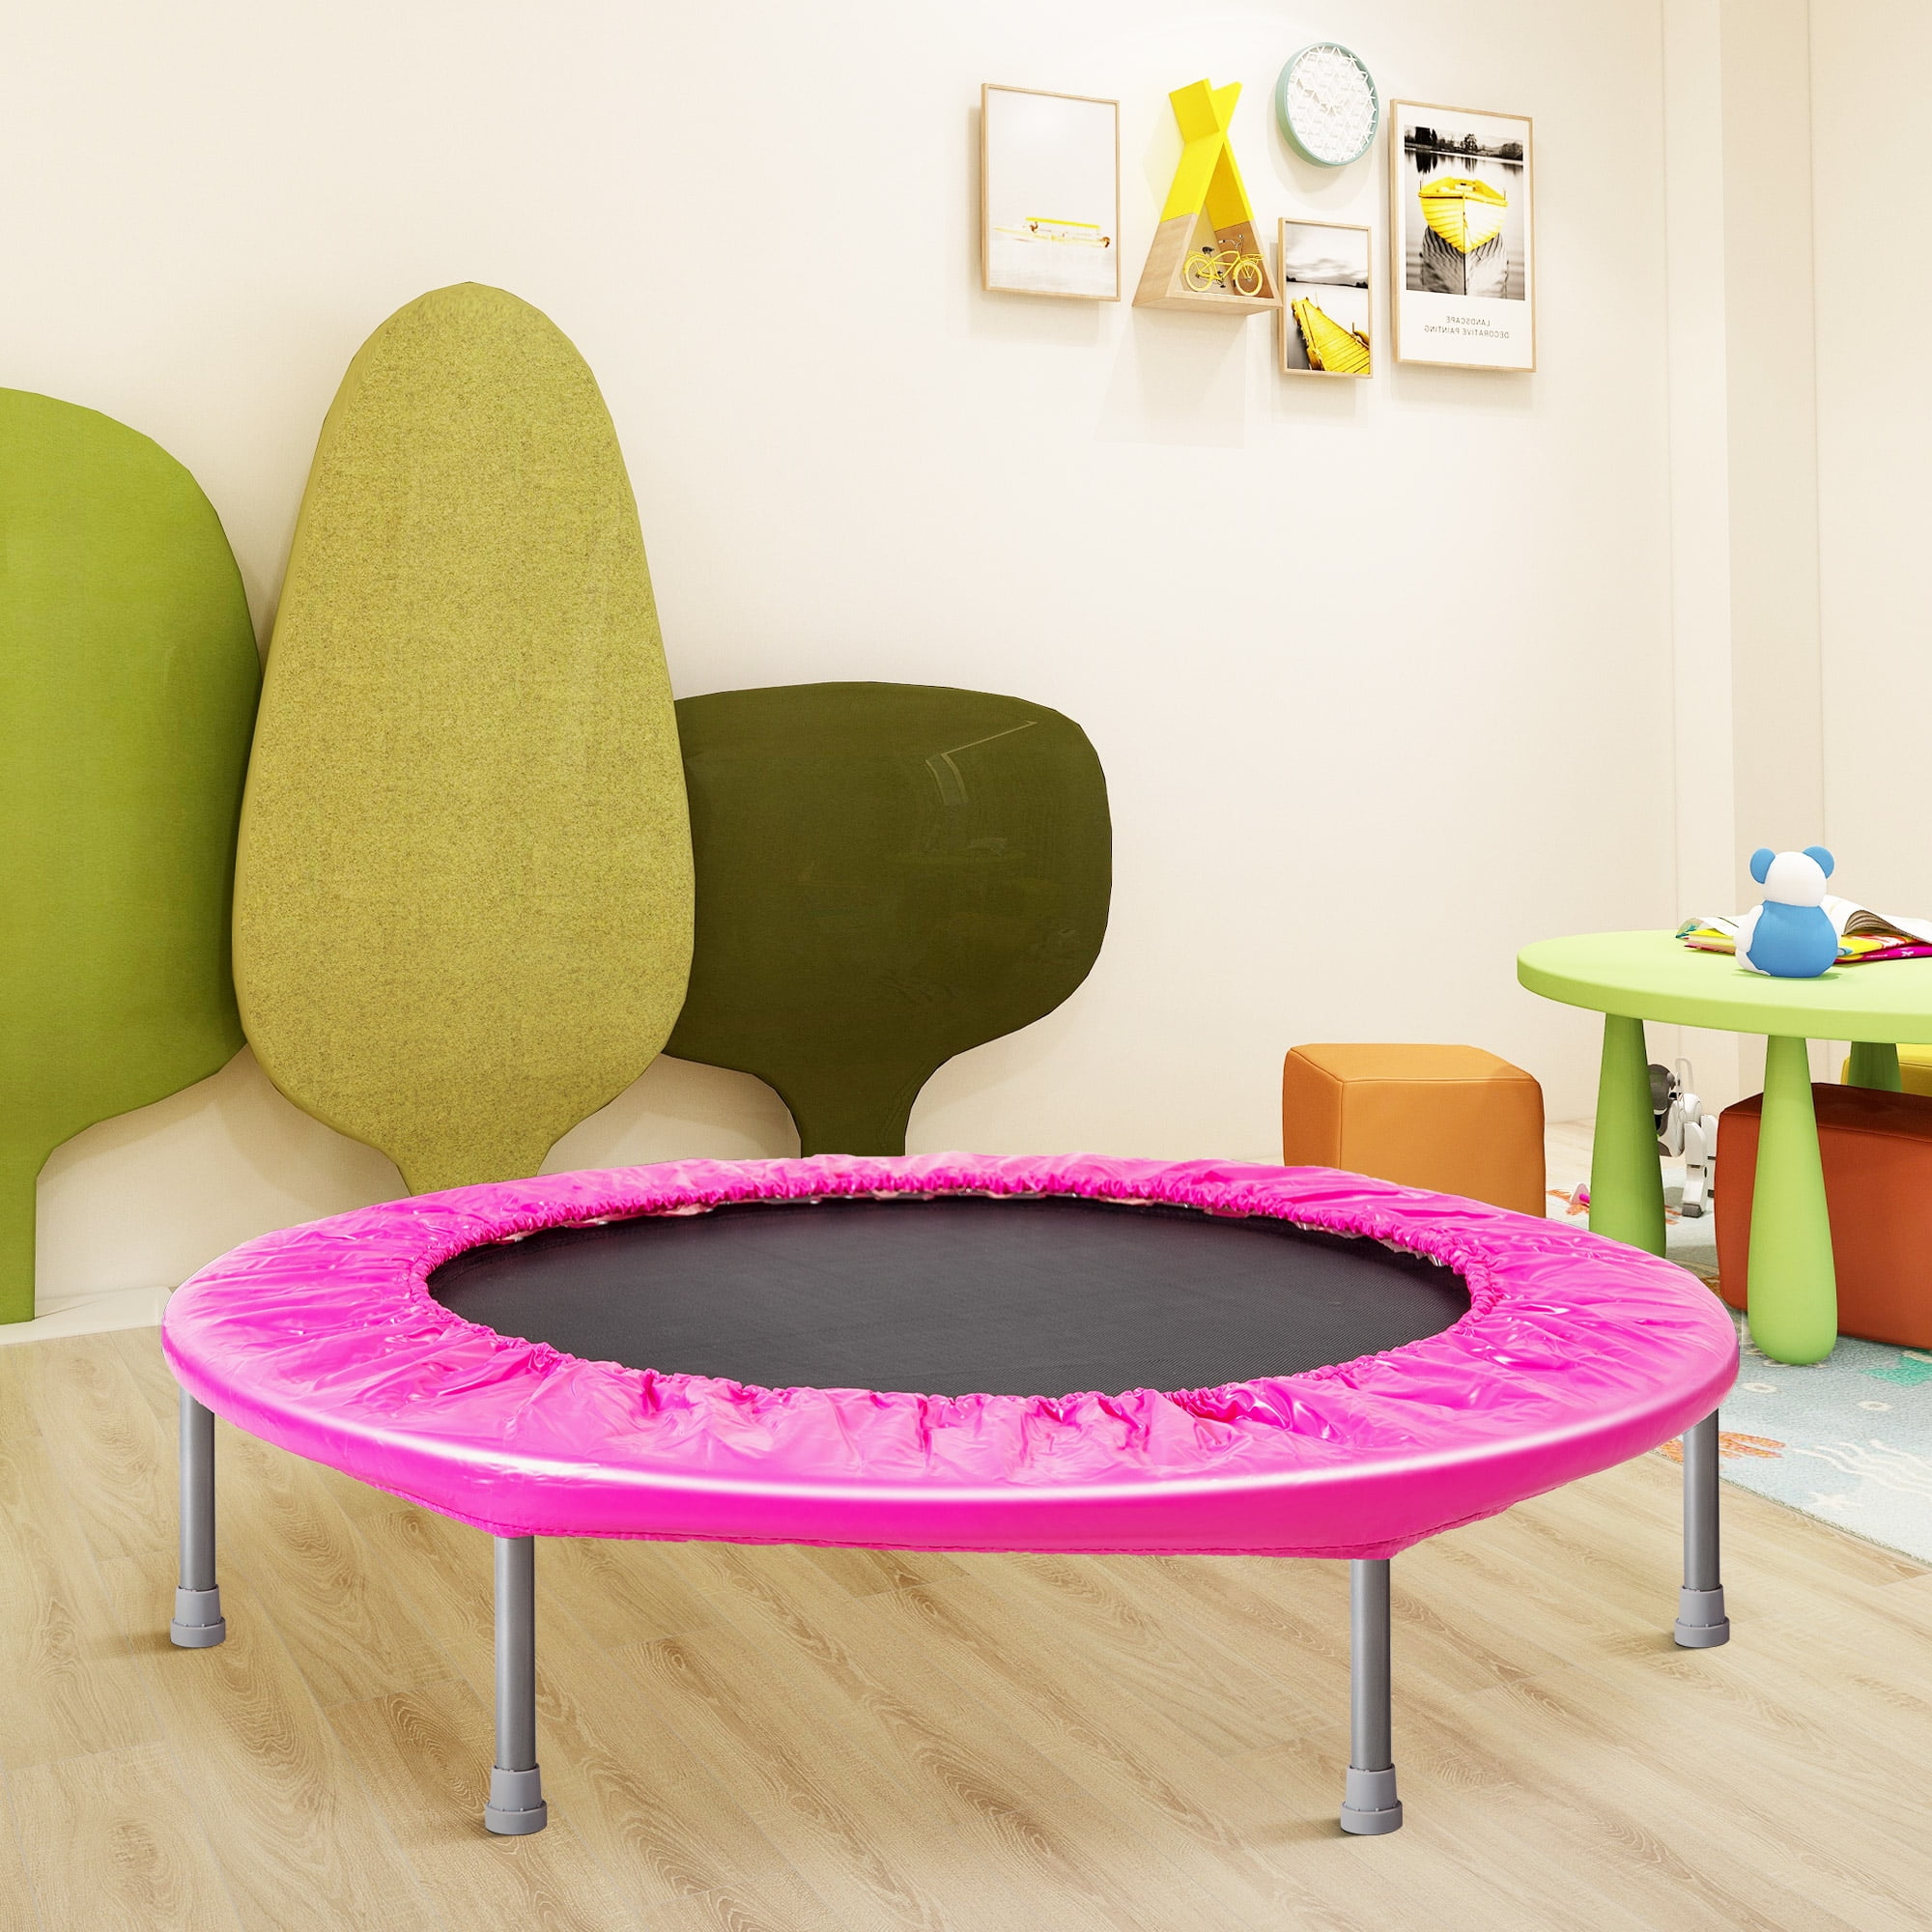 Round Bounce, 38" Mini Trampoline for Kids, Small Fitness Trampoline with Safety Pad, Durable Rebounder Trampoline for Kids Adults, Outdoor Indoor Exercise Trampoline Holds Up to 180 Pounds